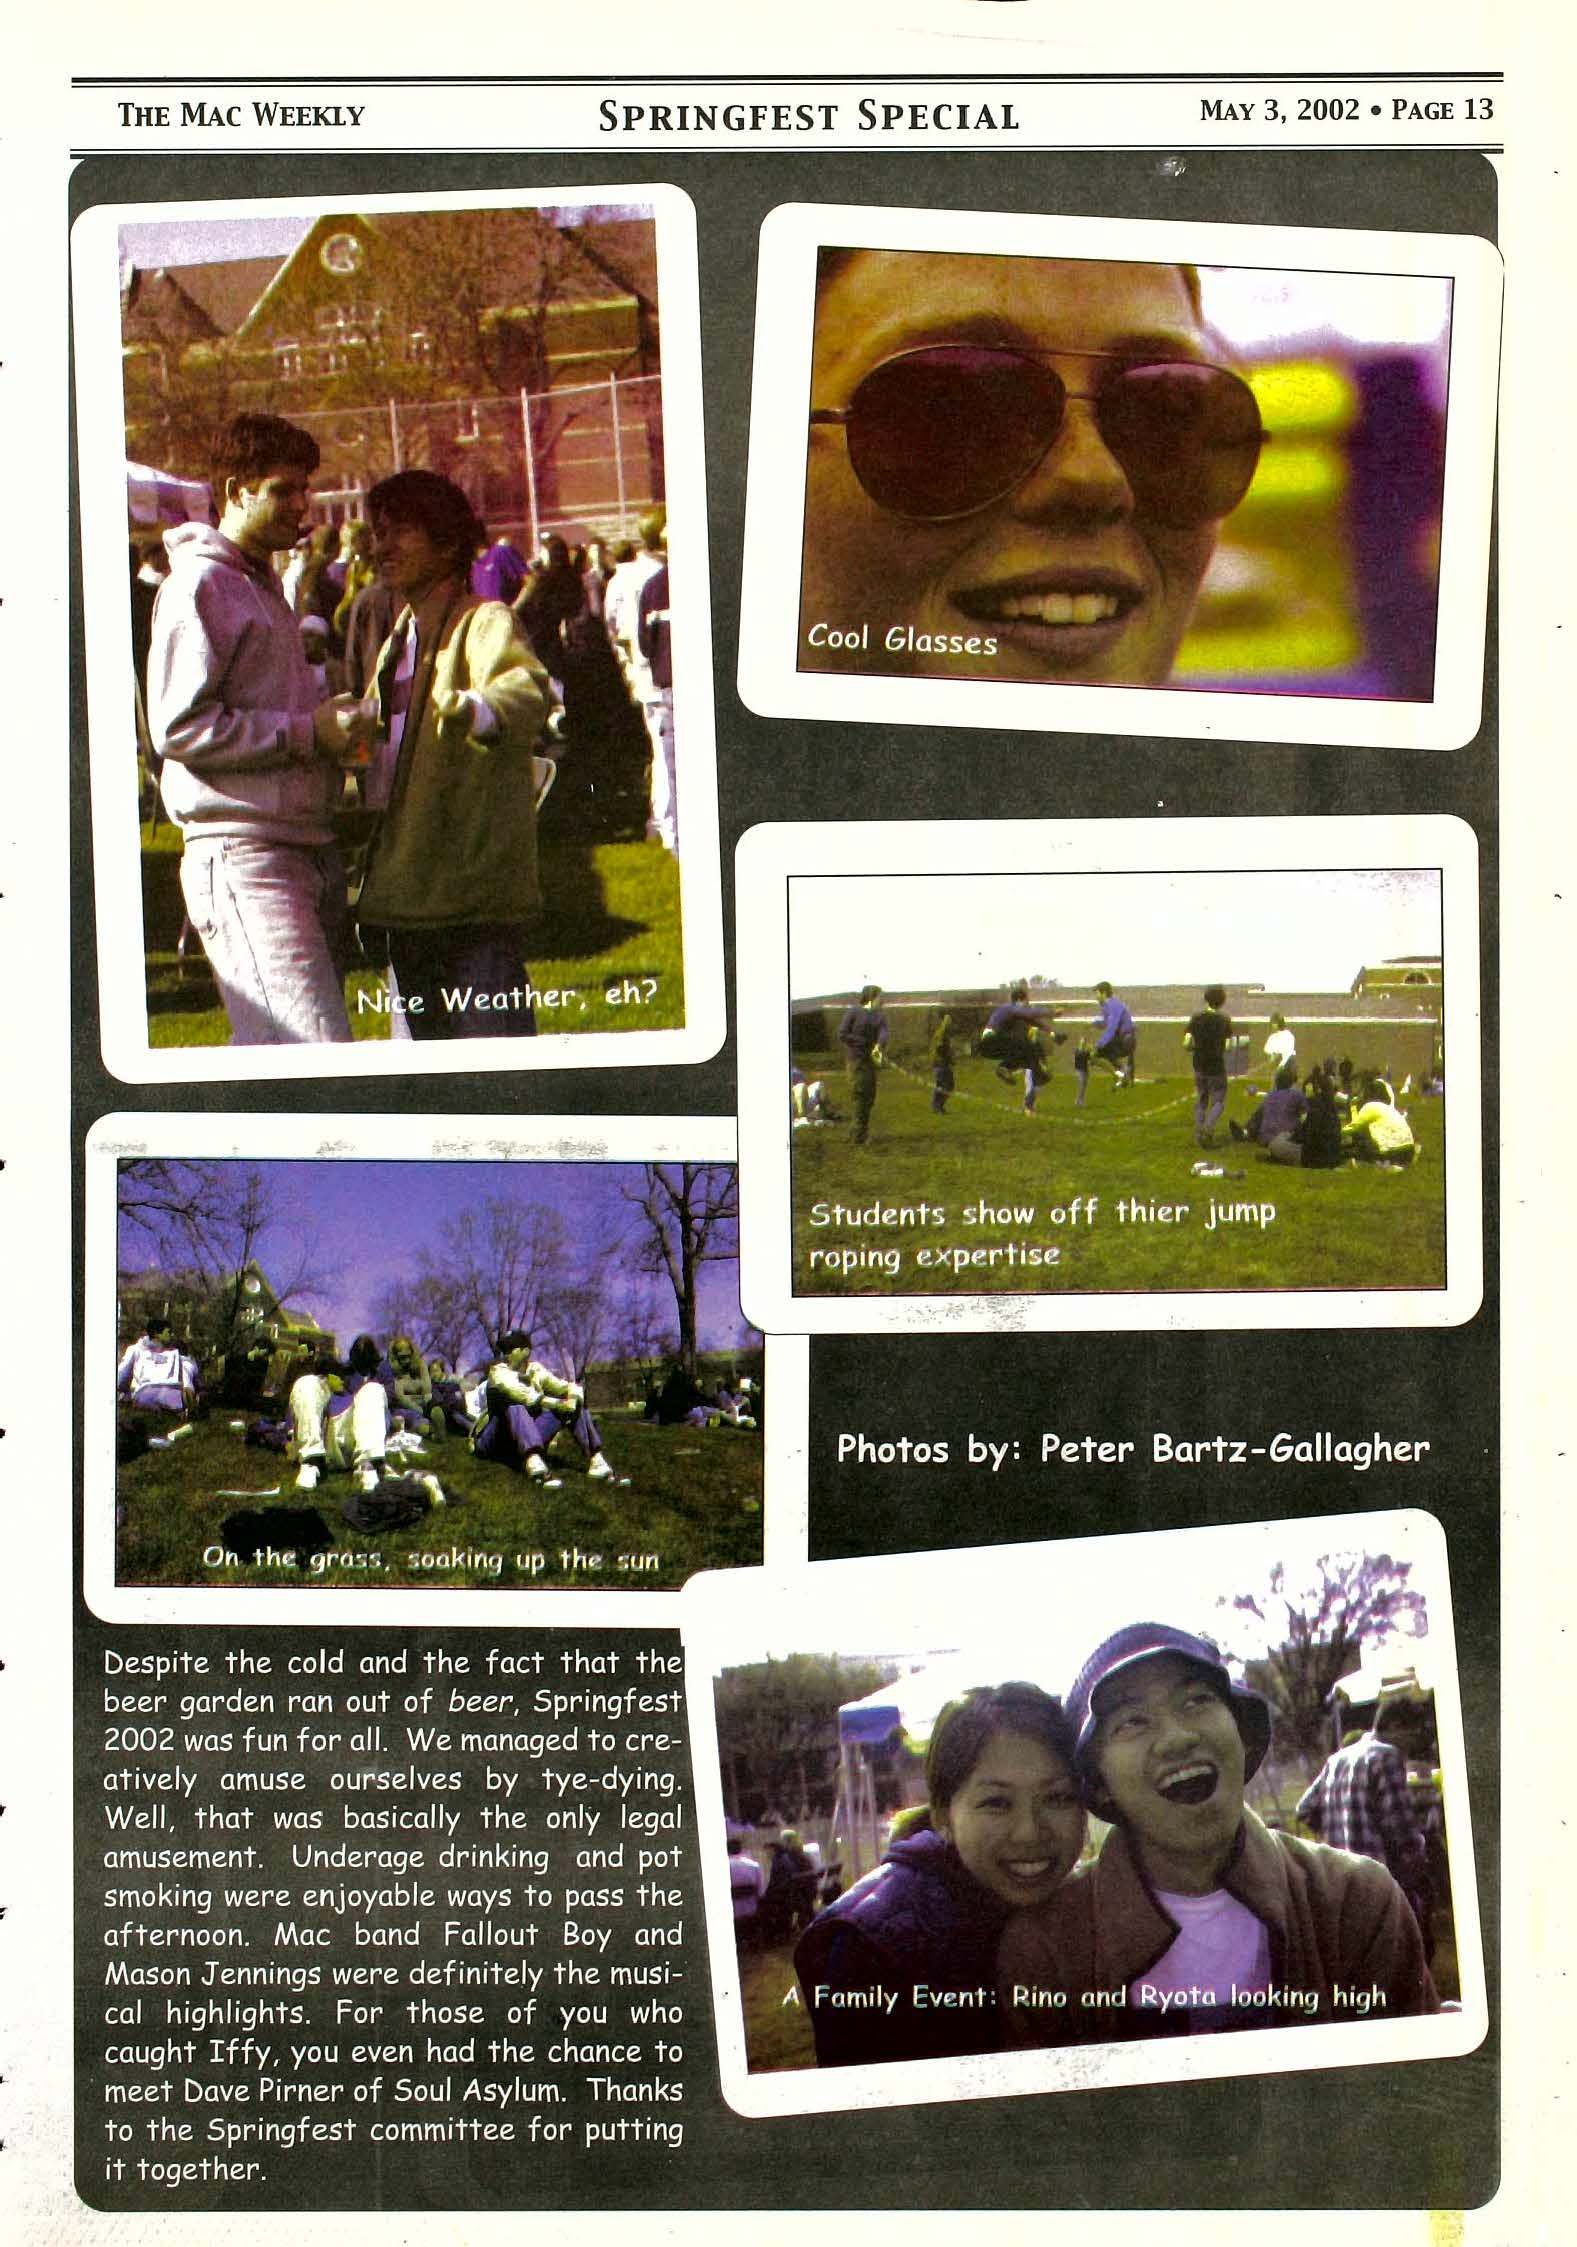 The Mac Weekly, May 3, 2002. Springfest.